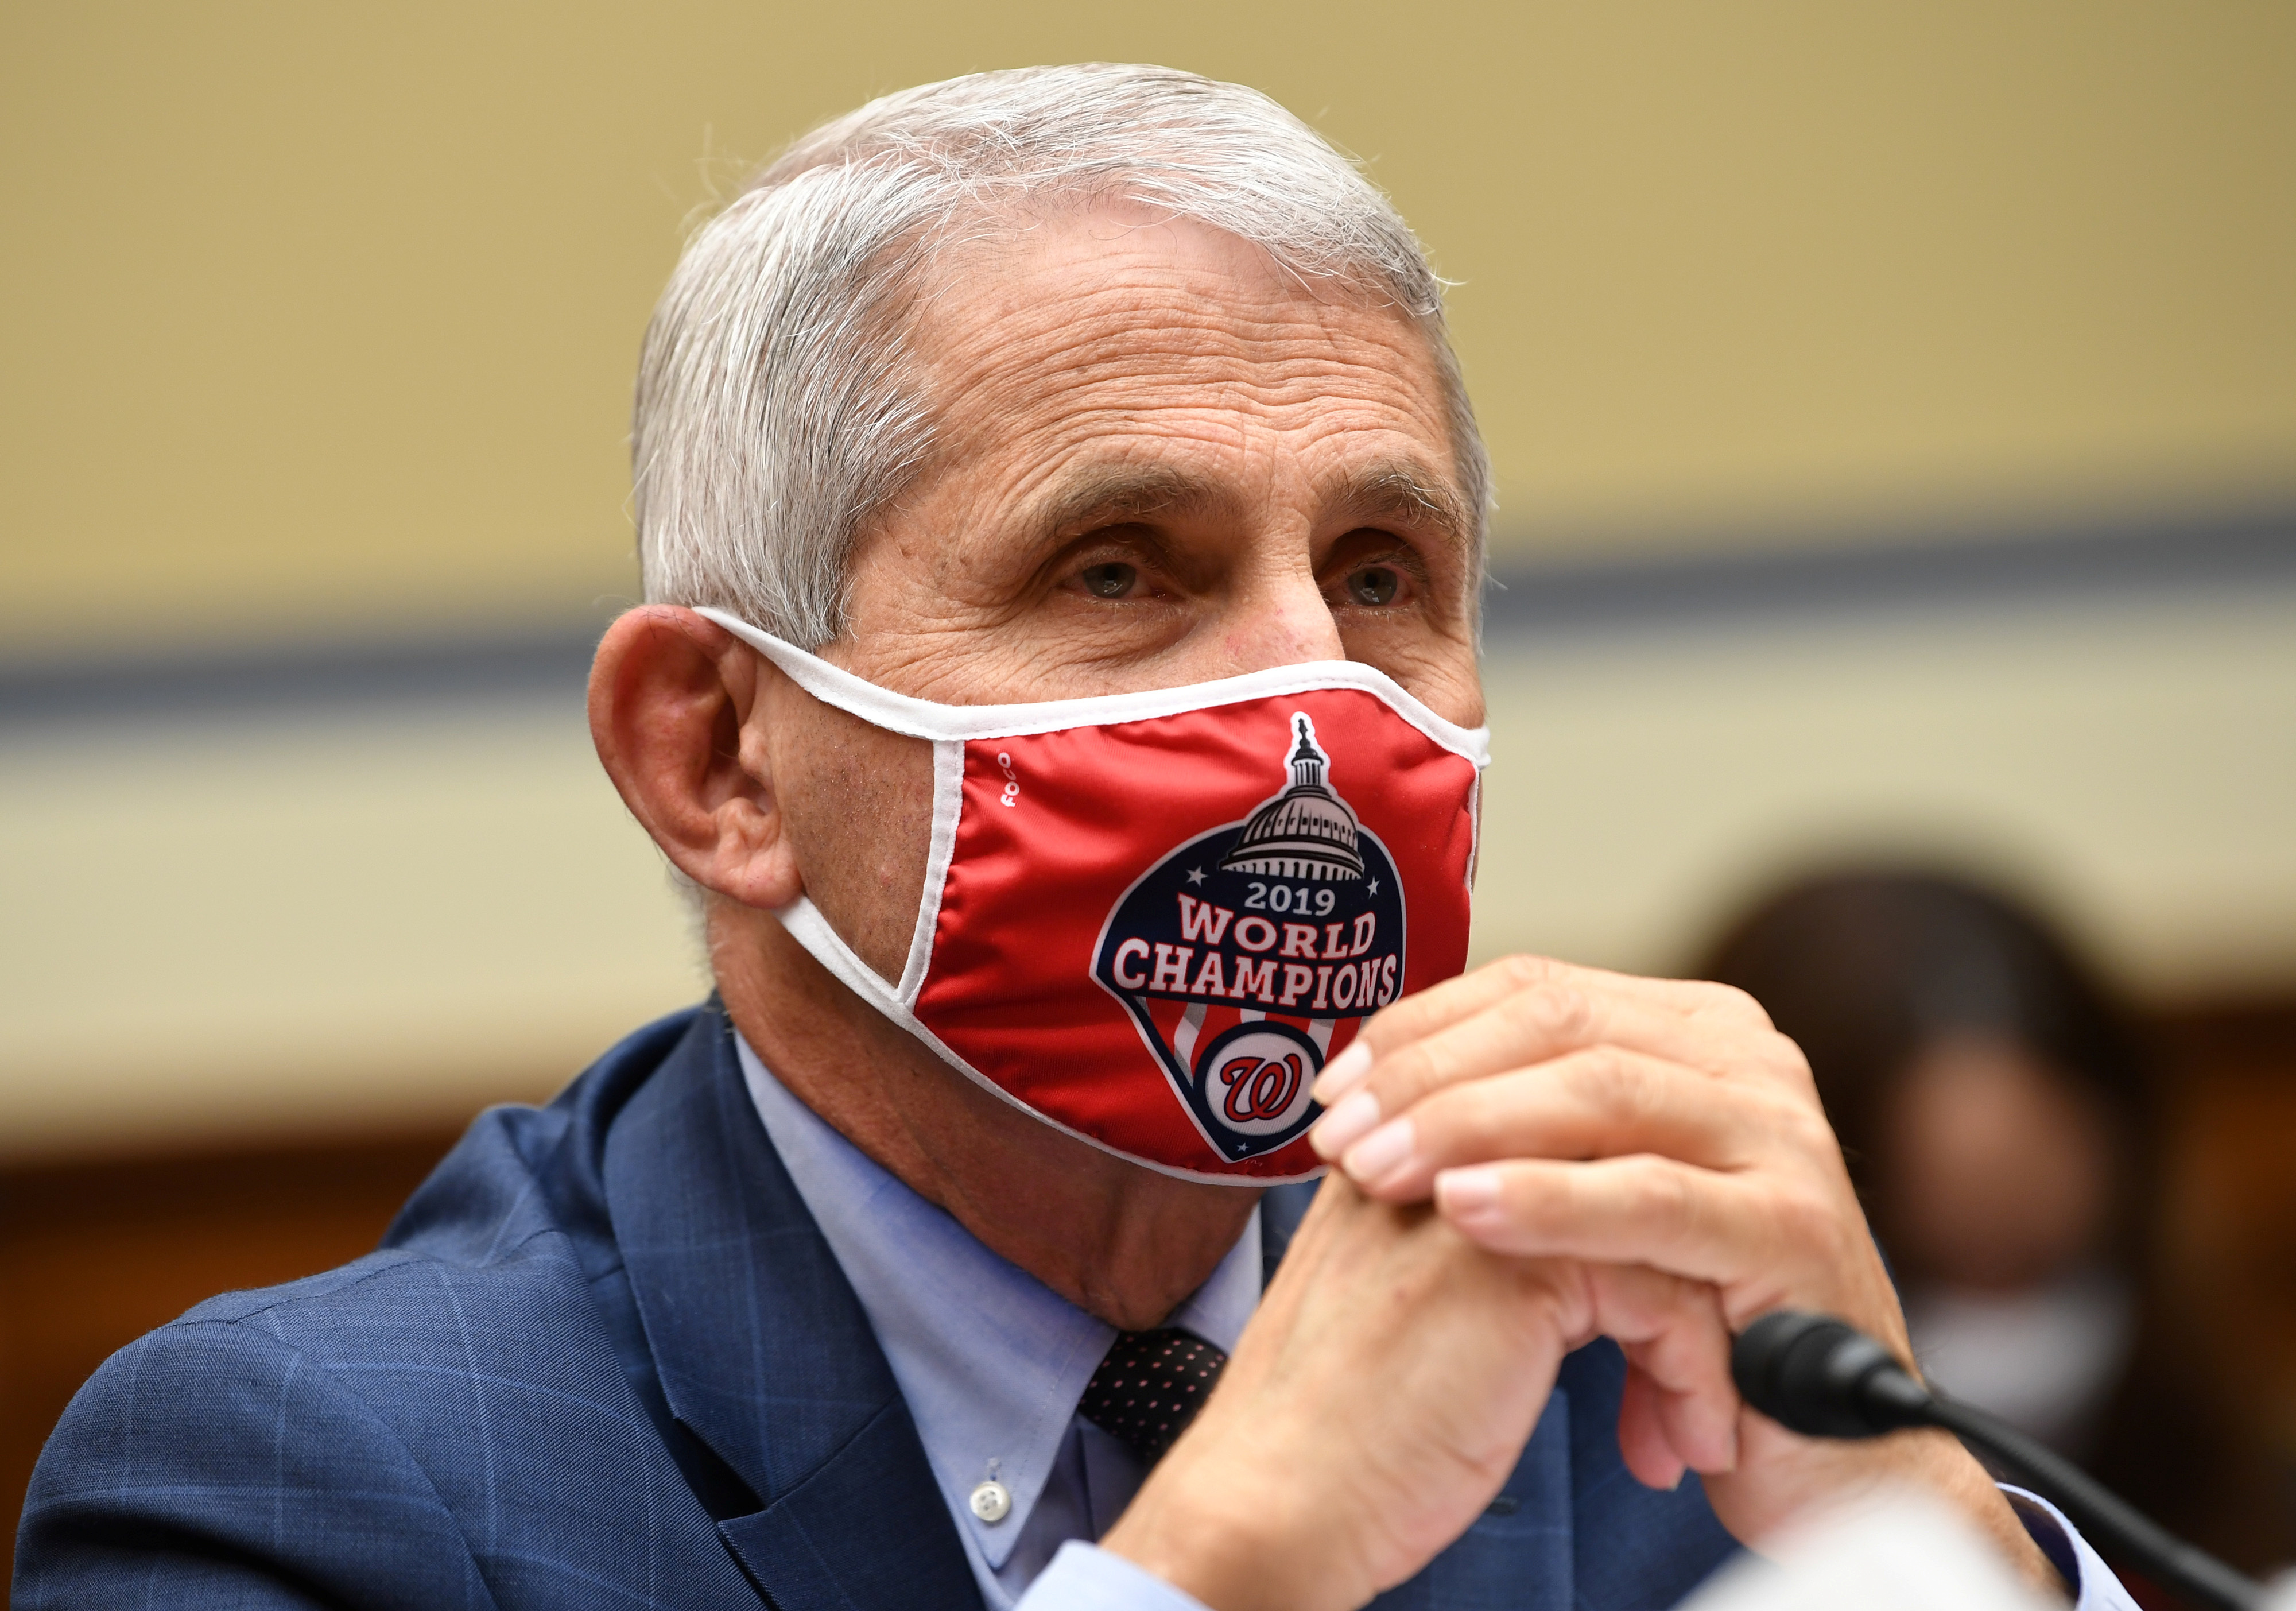 Dr Anthony Fauci, director of the National Institute for Allergy and Infectious Diseases, arrives to testify before the House Select Subcommittee on the Coronavirus Crisis hearing in Washington, DC July 31, 2020. u00e2u20acu201d Kevin Dietsch/Pool handout via Reuters